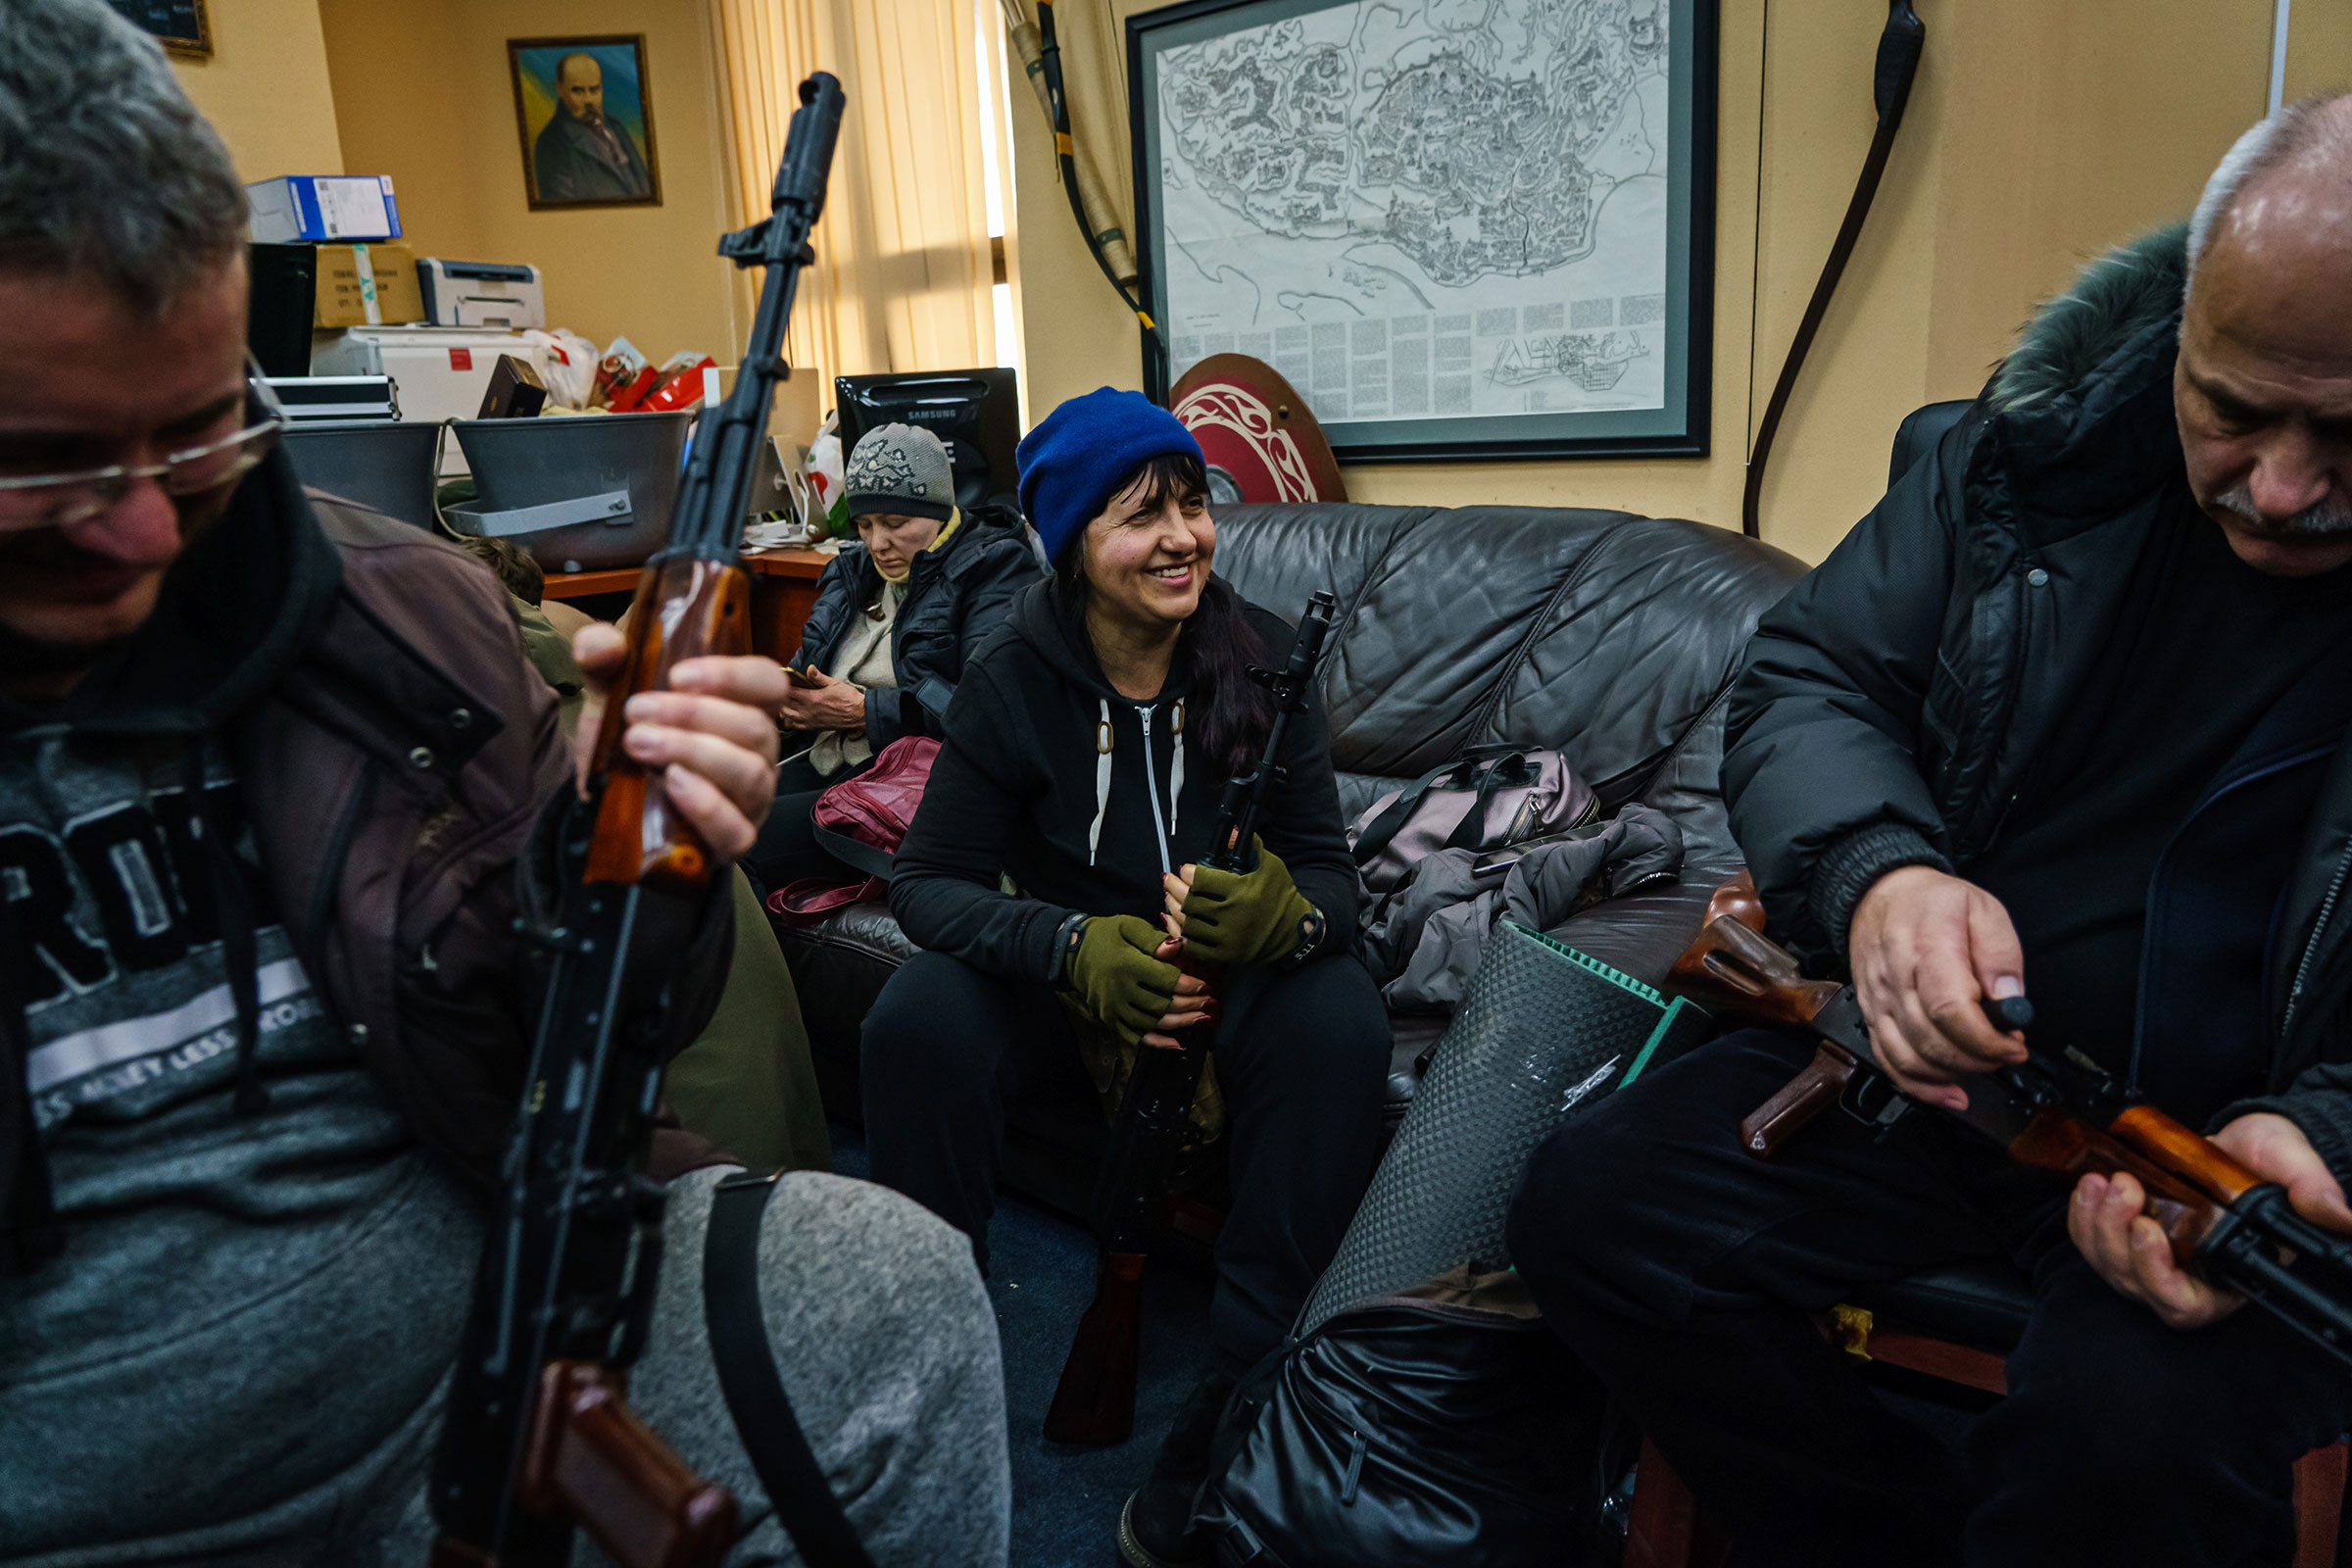 Photos: Ukrainian citizens volunteer to defend and fight Russia